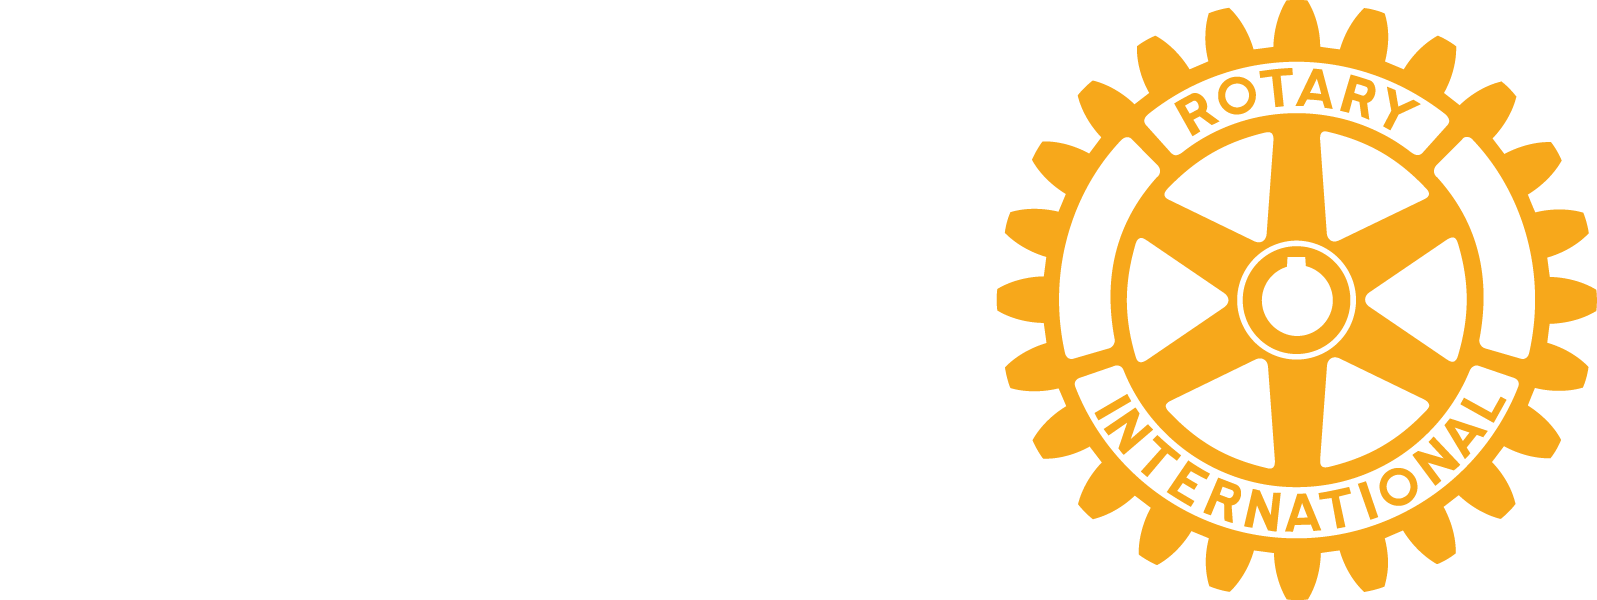 Las Vegas Rotary Club | Founded in 1923